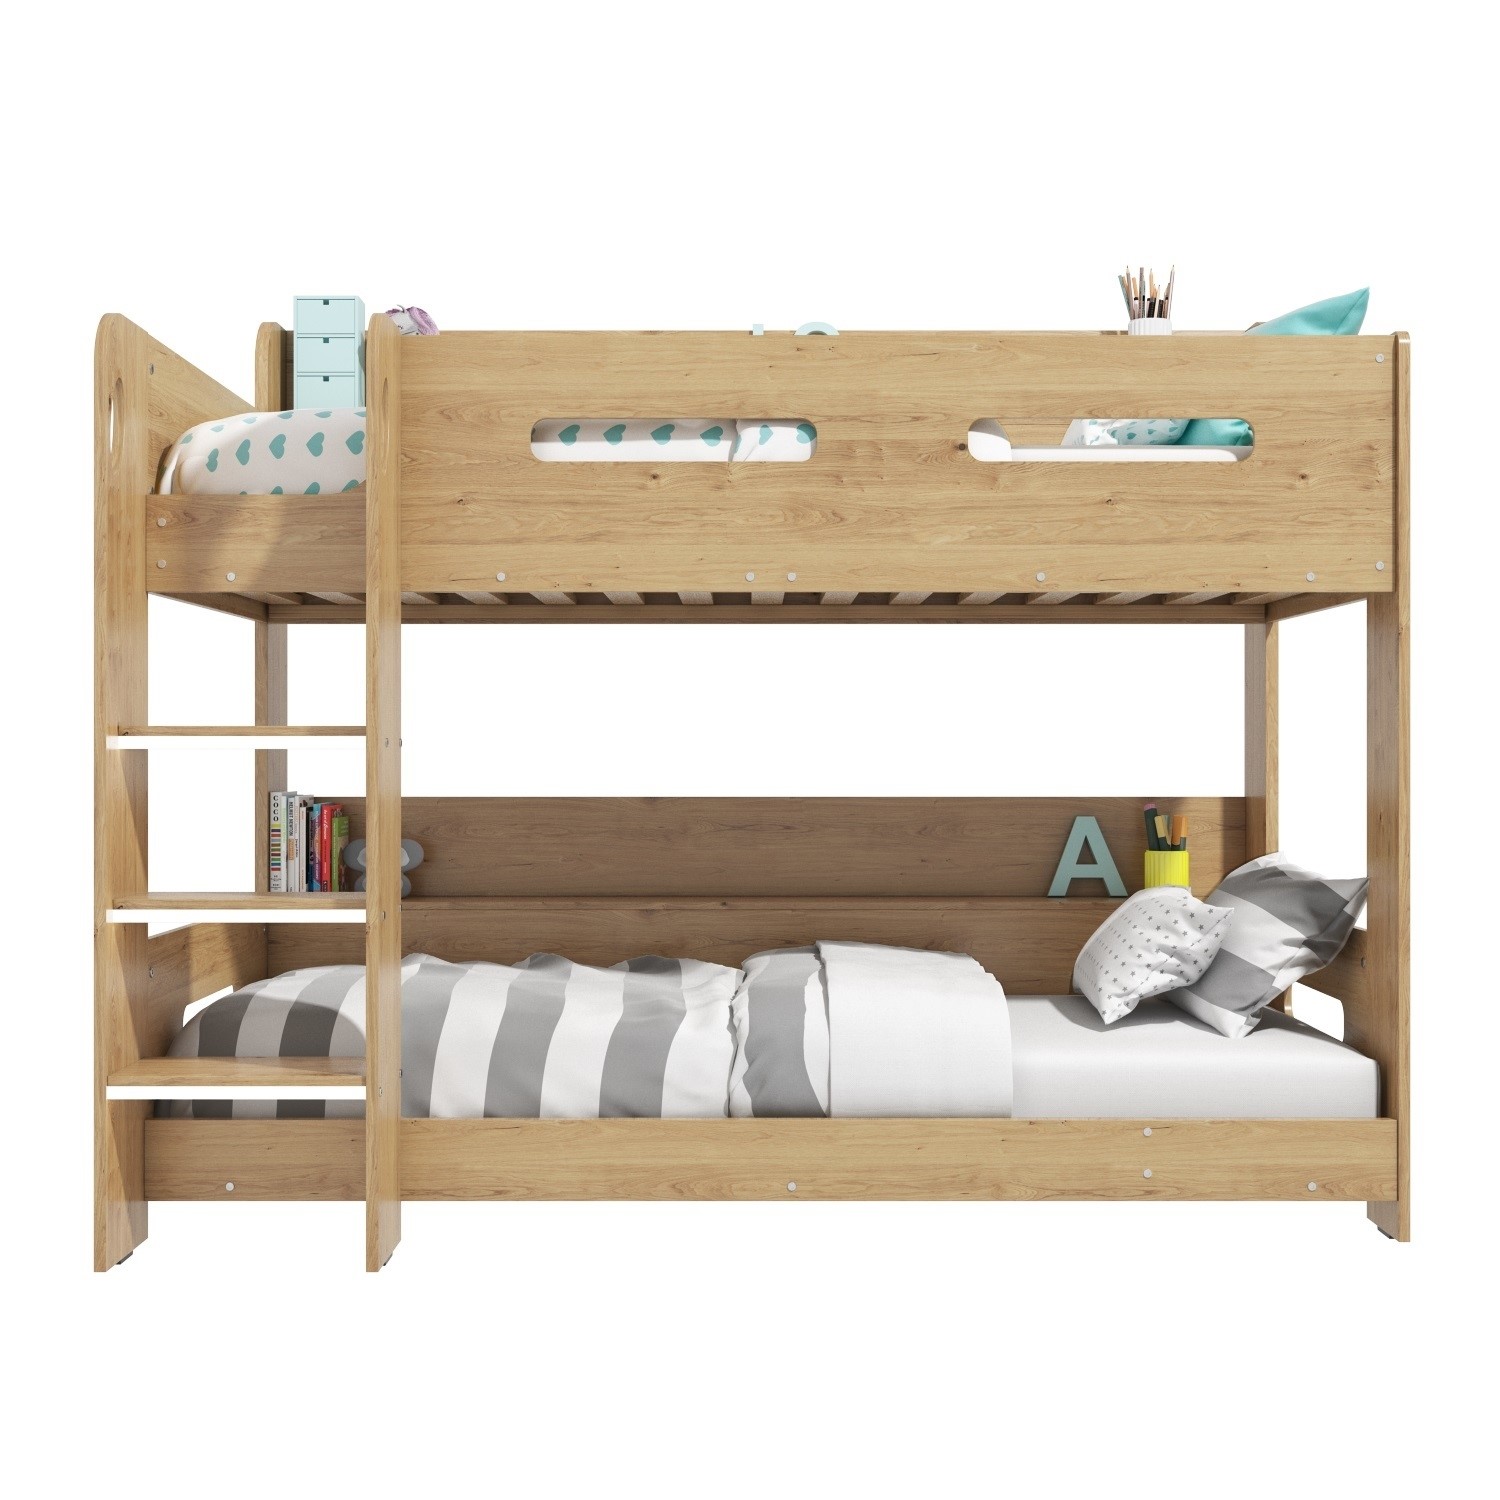 Sky Bunk Bed In Oak Ladder Can Be, Side By Side Bunk Beds